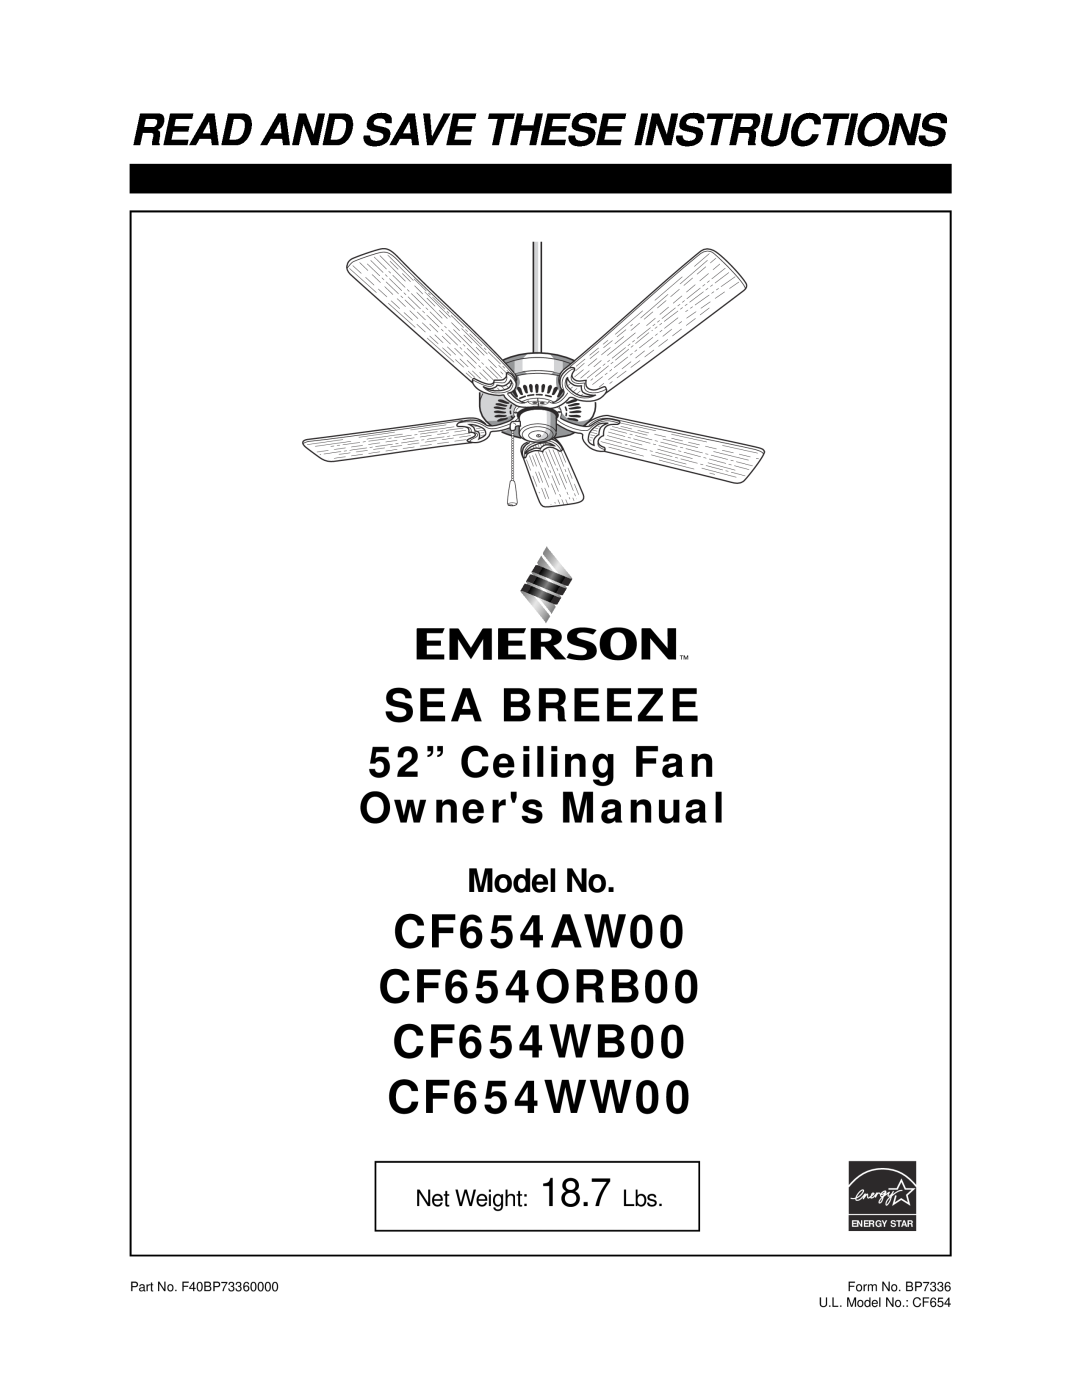 Emerson owner manual Sea Breeze, CF654AW00 CF654ORB00 CF654WB00 CF654WW00, Read And Save These Instructions, Model No 